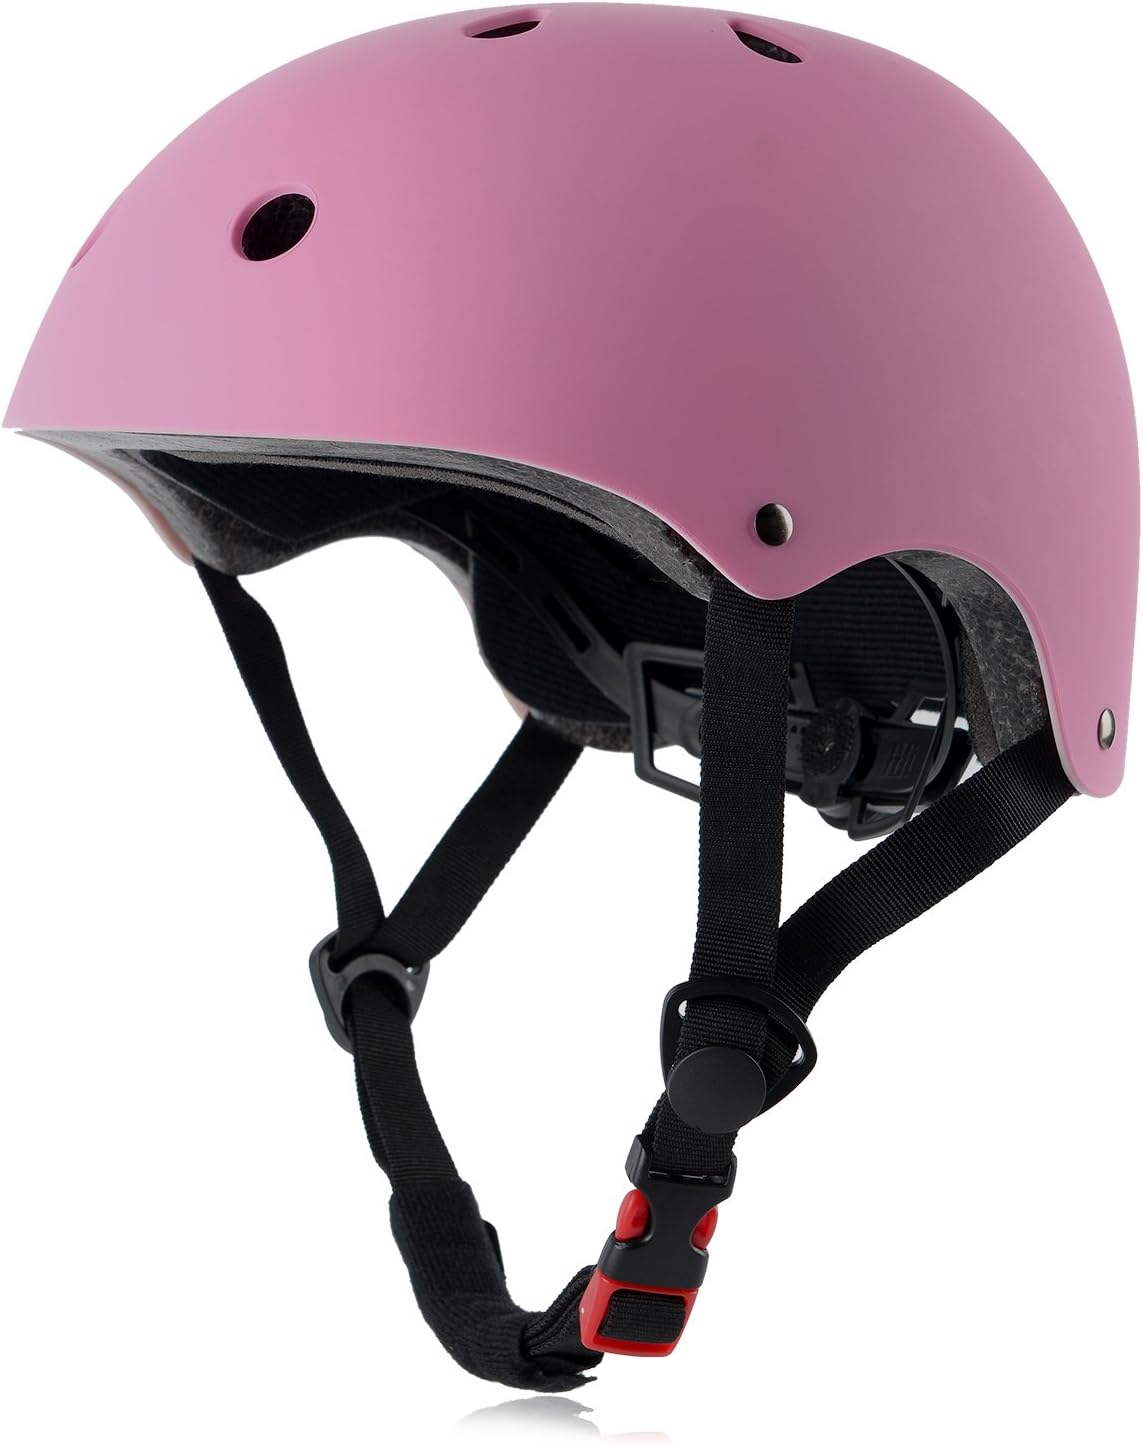 Kids Bike Helmet, Adjustable and Multi-Sport, from Toddler to Youth, 3 Sizes